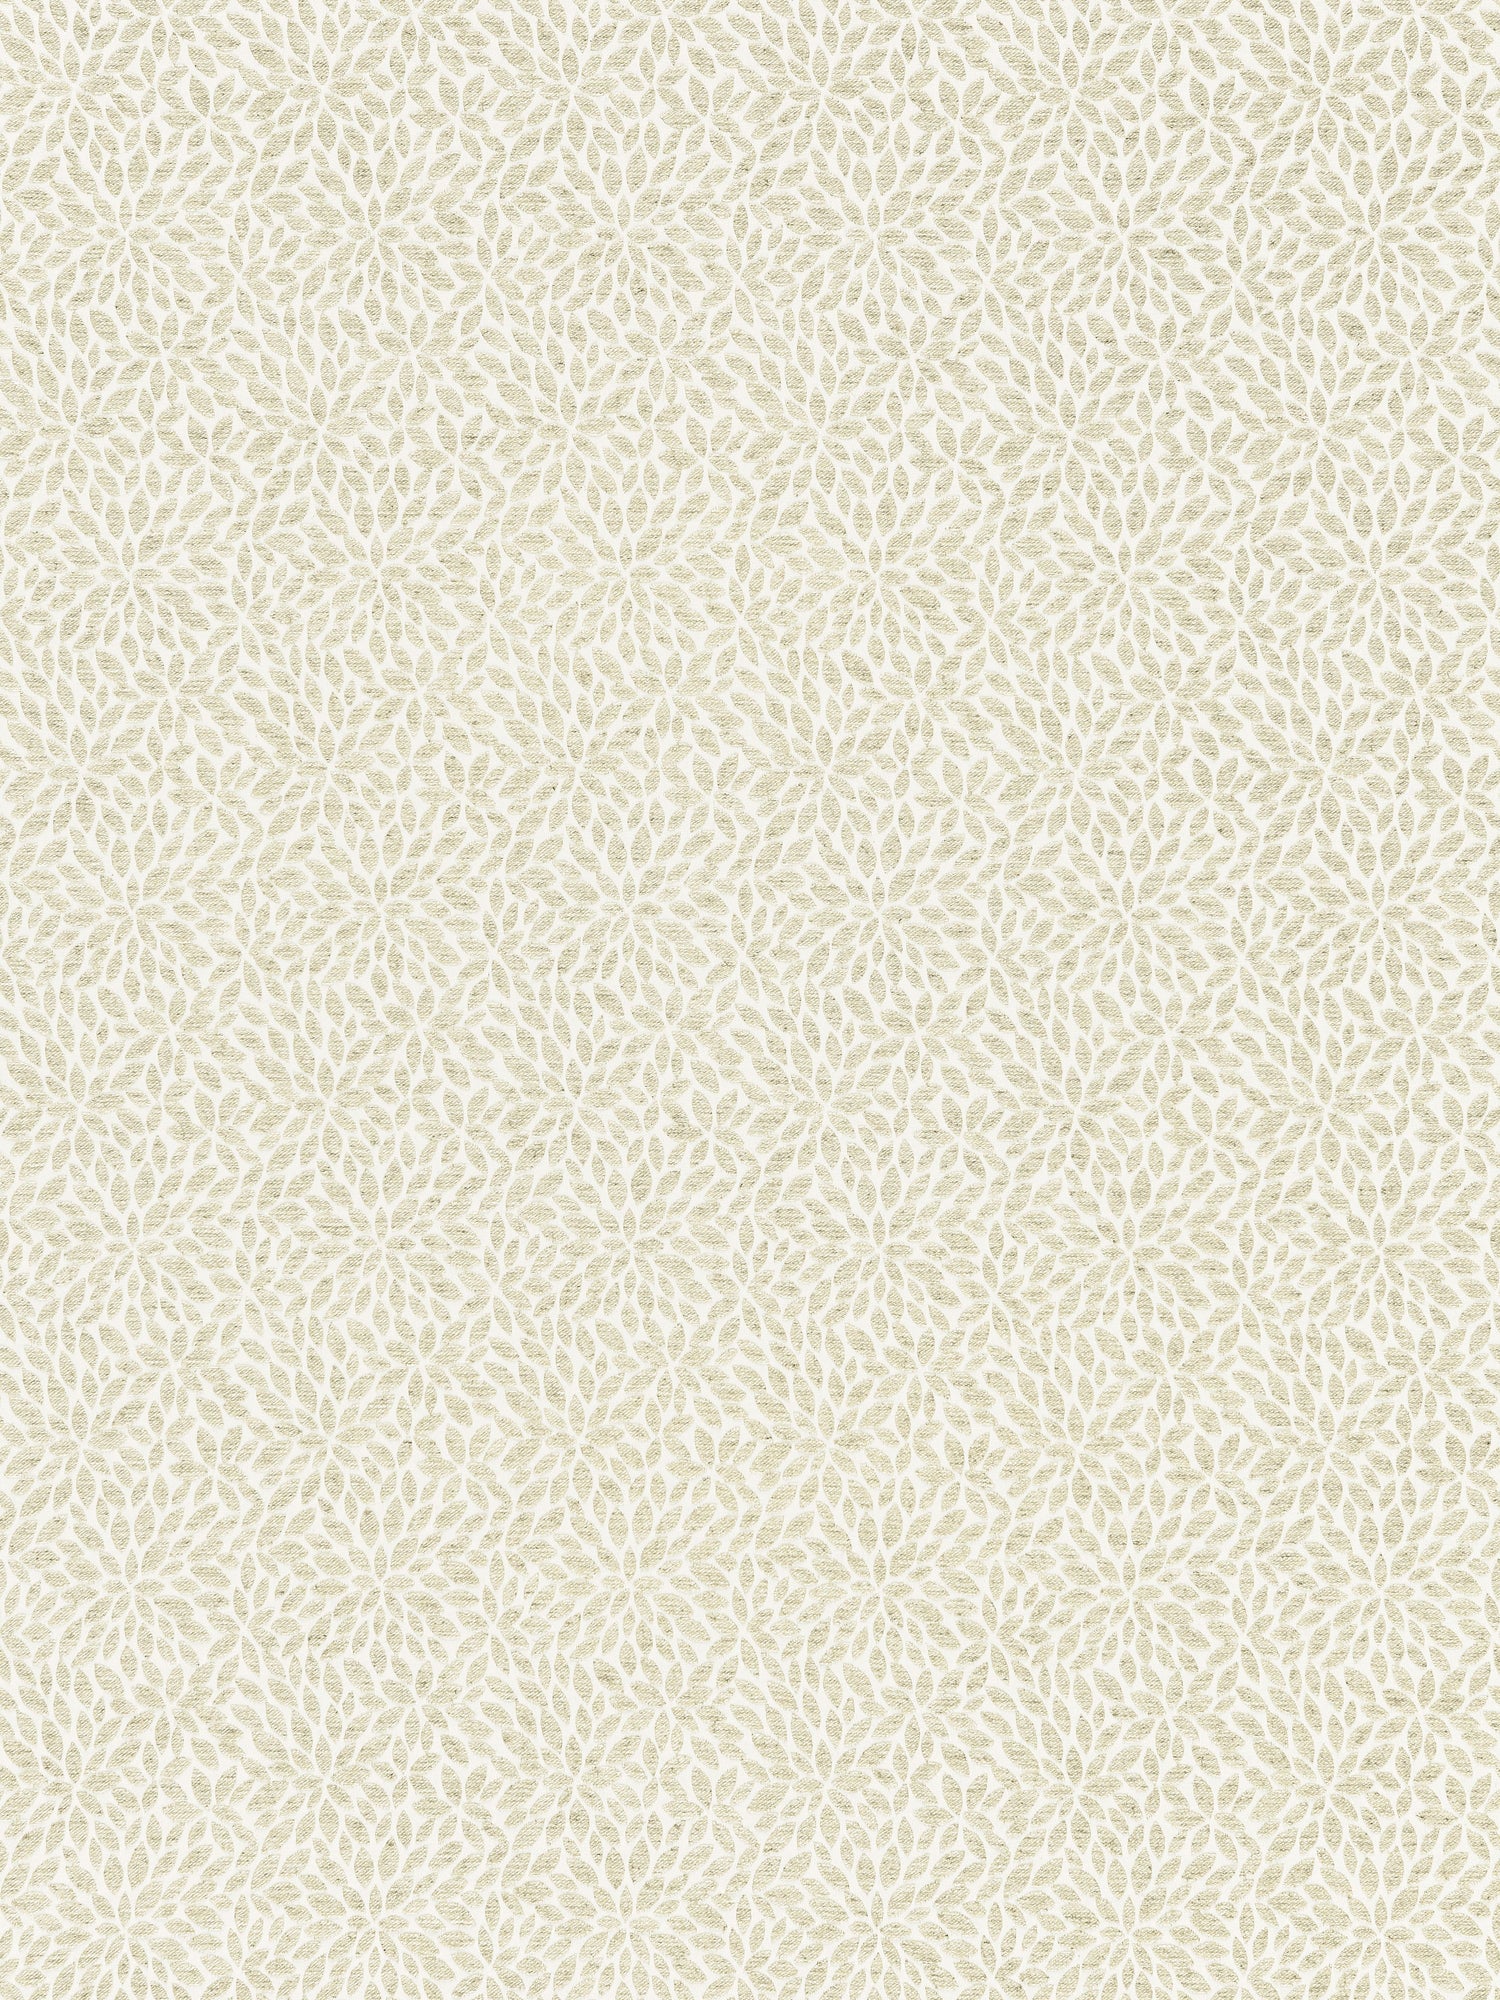 Risa Weave fabric in birch color - pattern number SC 000127239 - by Scalamandre in the Scalamandre Fabrics Book 1 collection